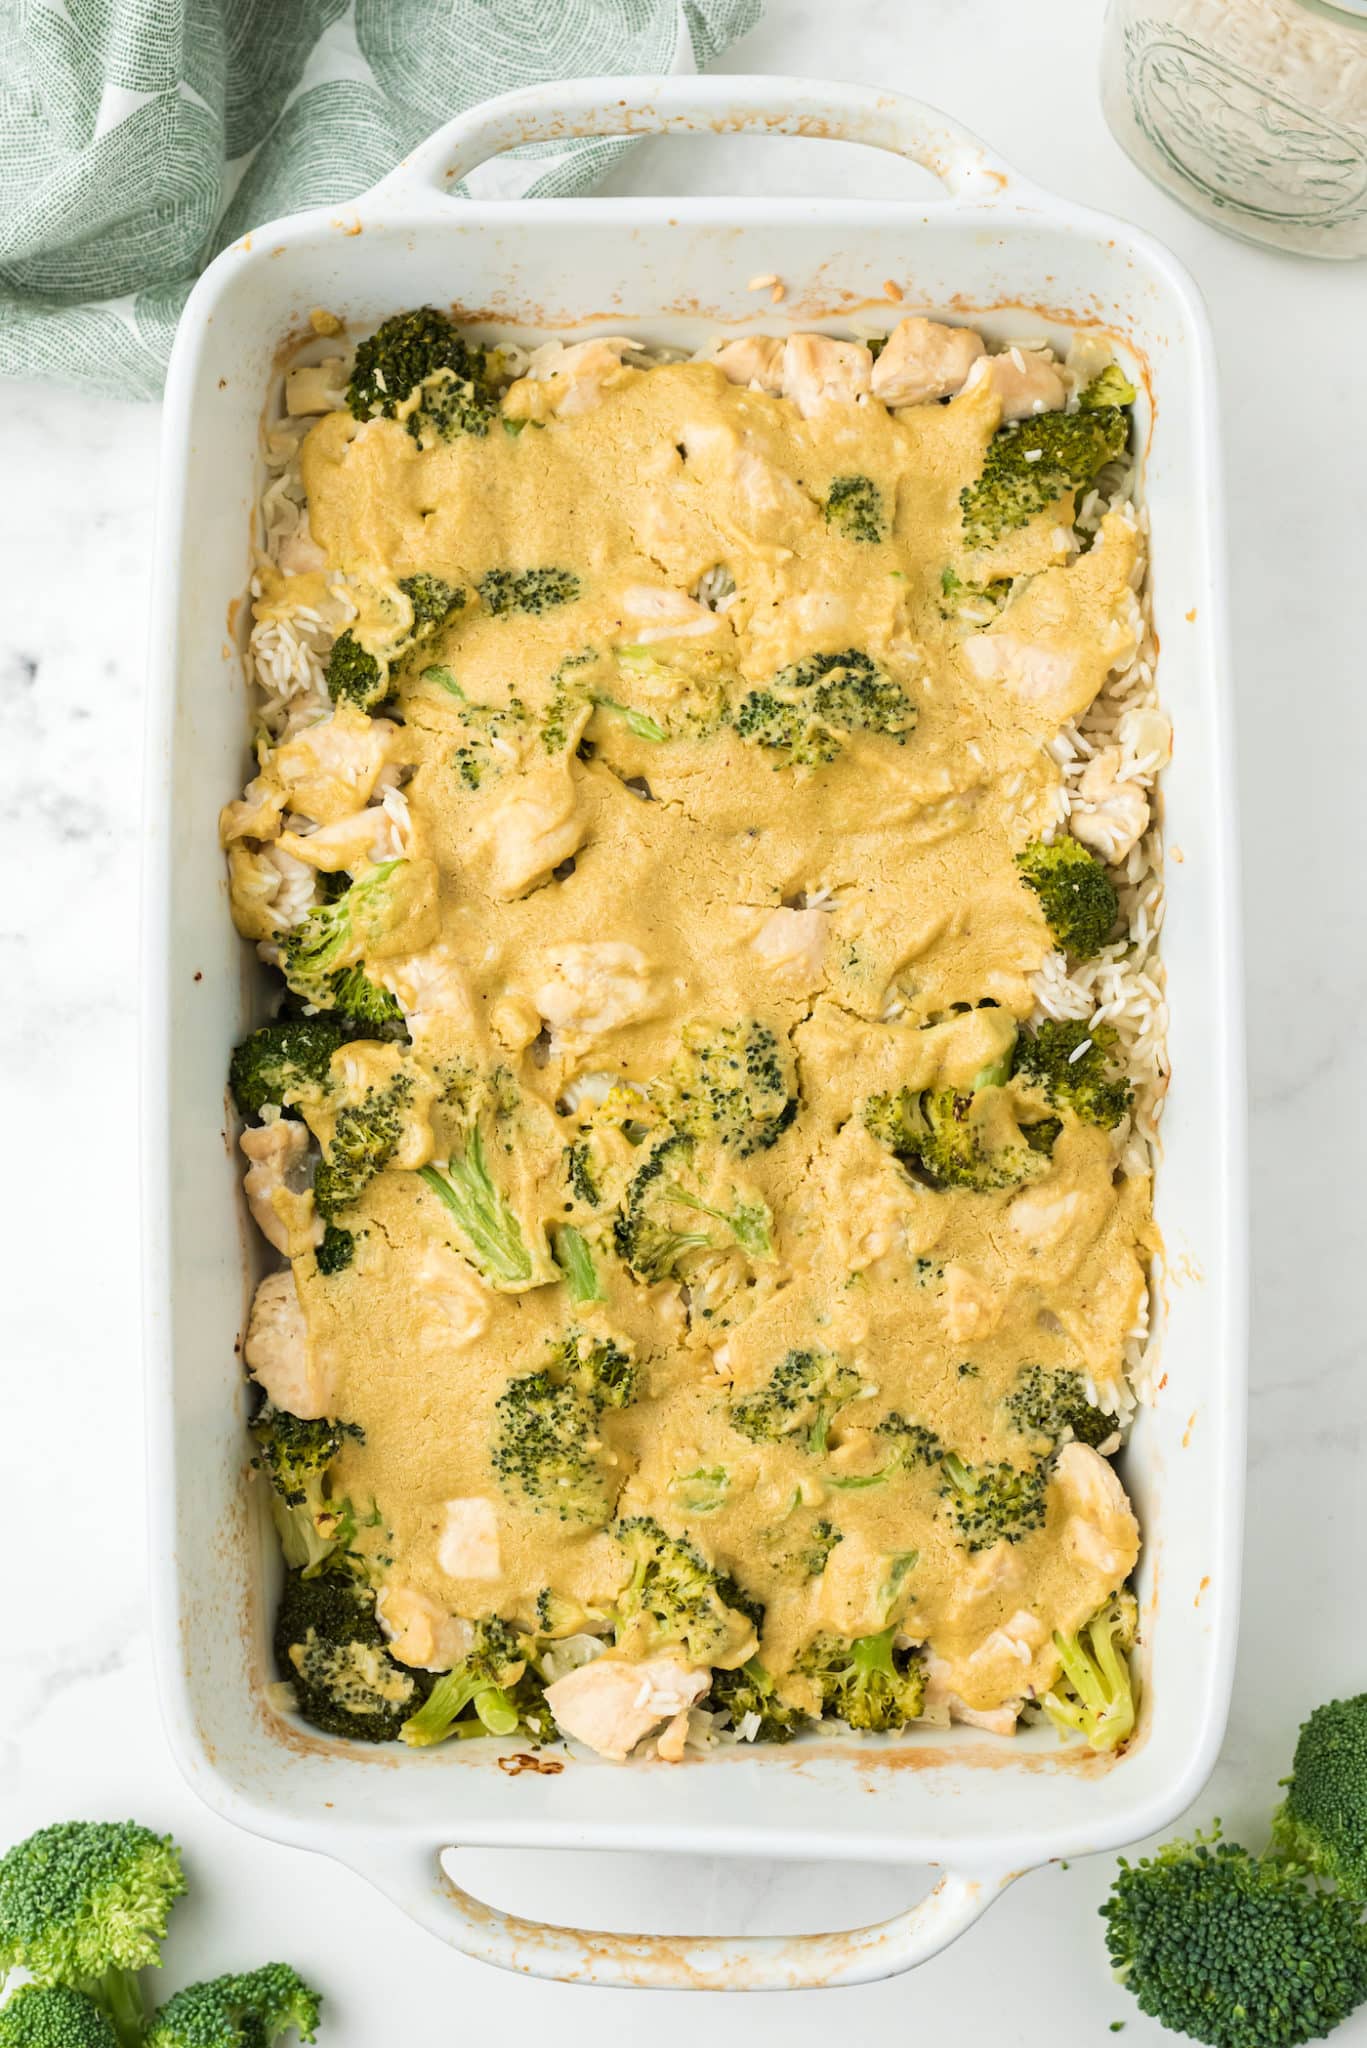 chicken and rice casserole baked in a pan.